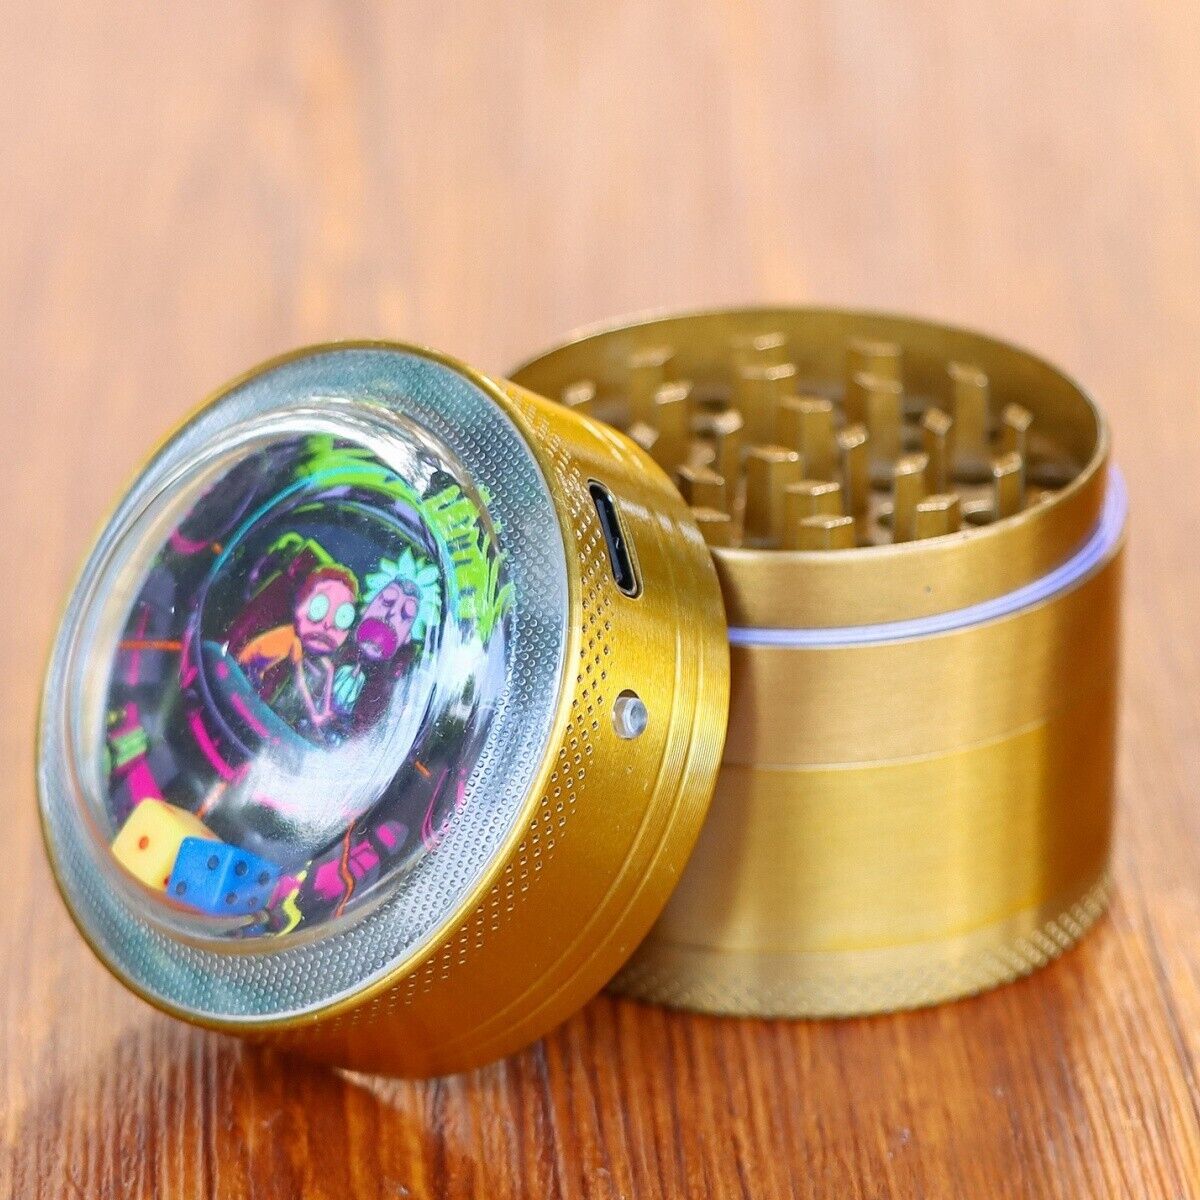 50mm 4-Layer Zinc Alloy Herb Grinder with Illuminated Dice Lid, Yellow